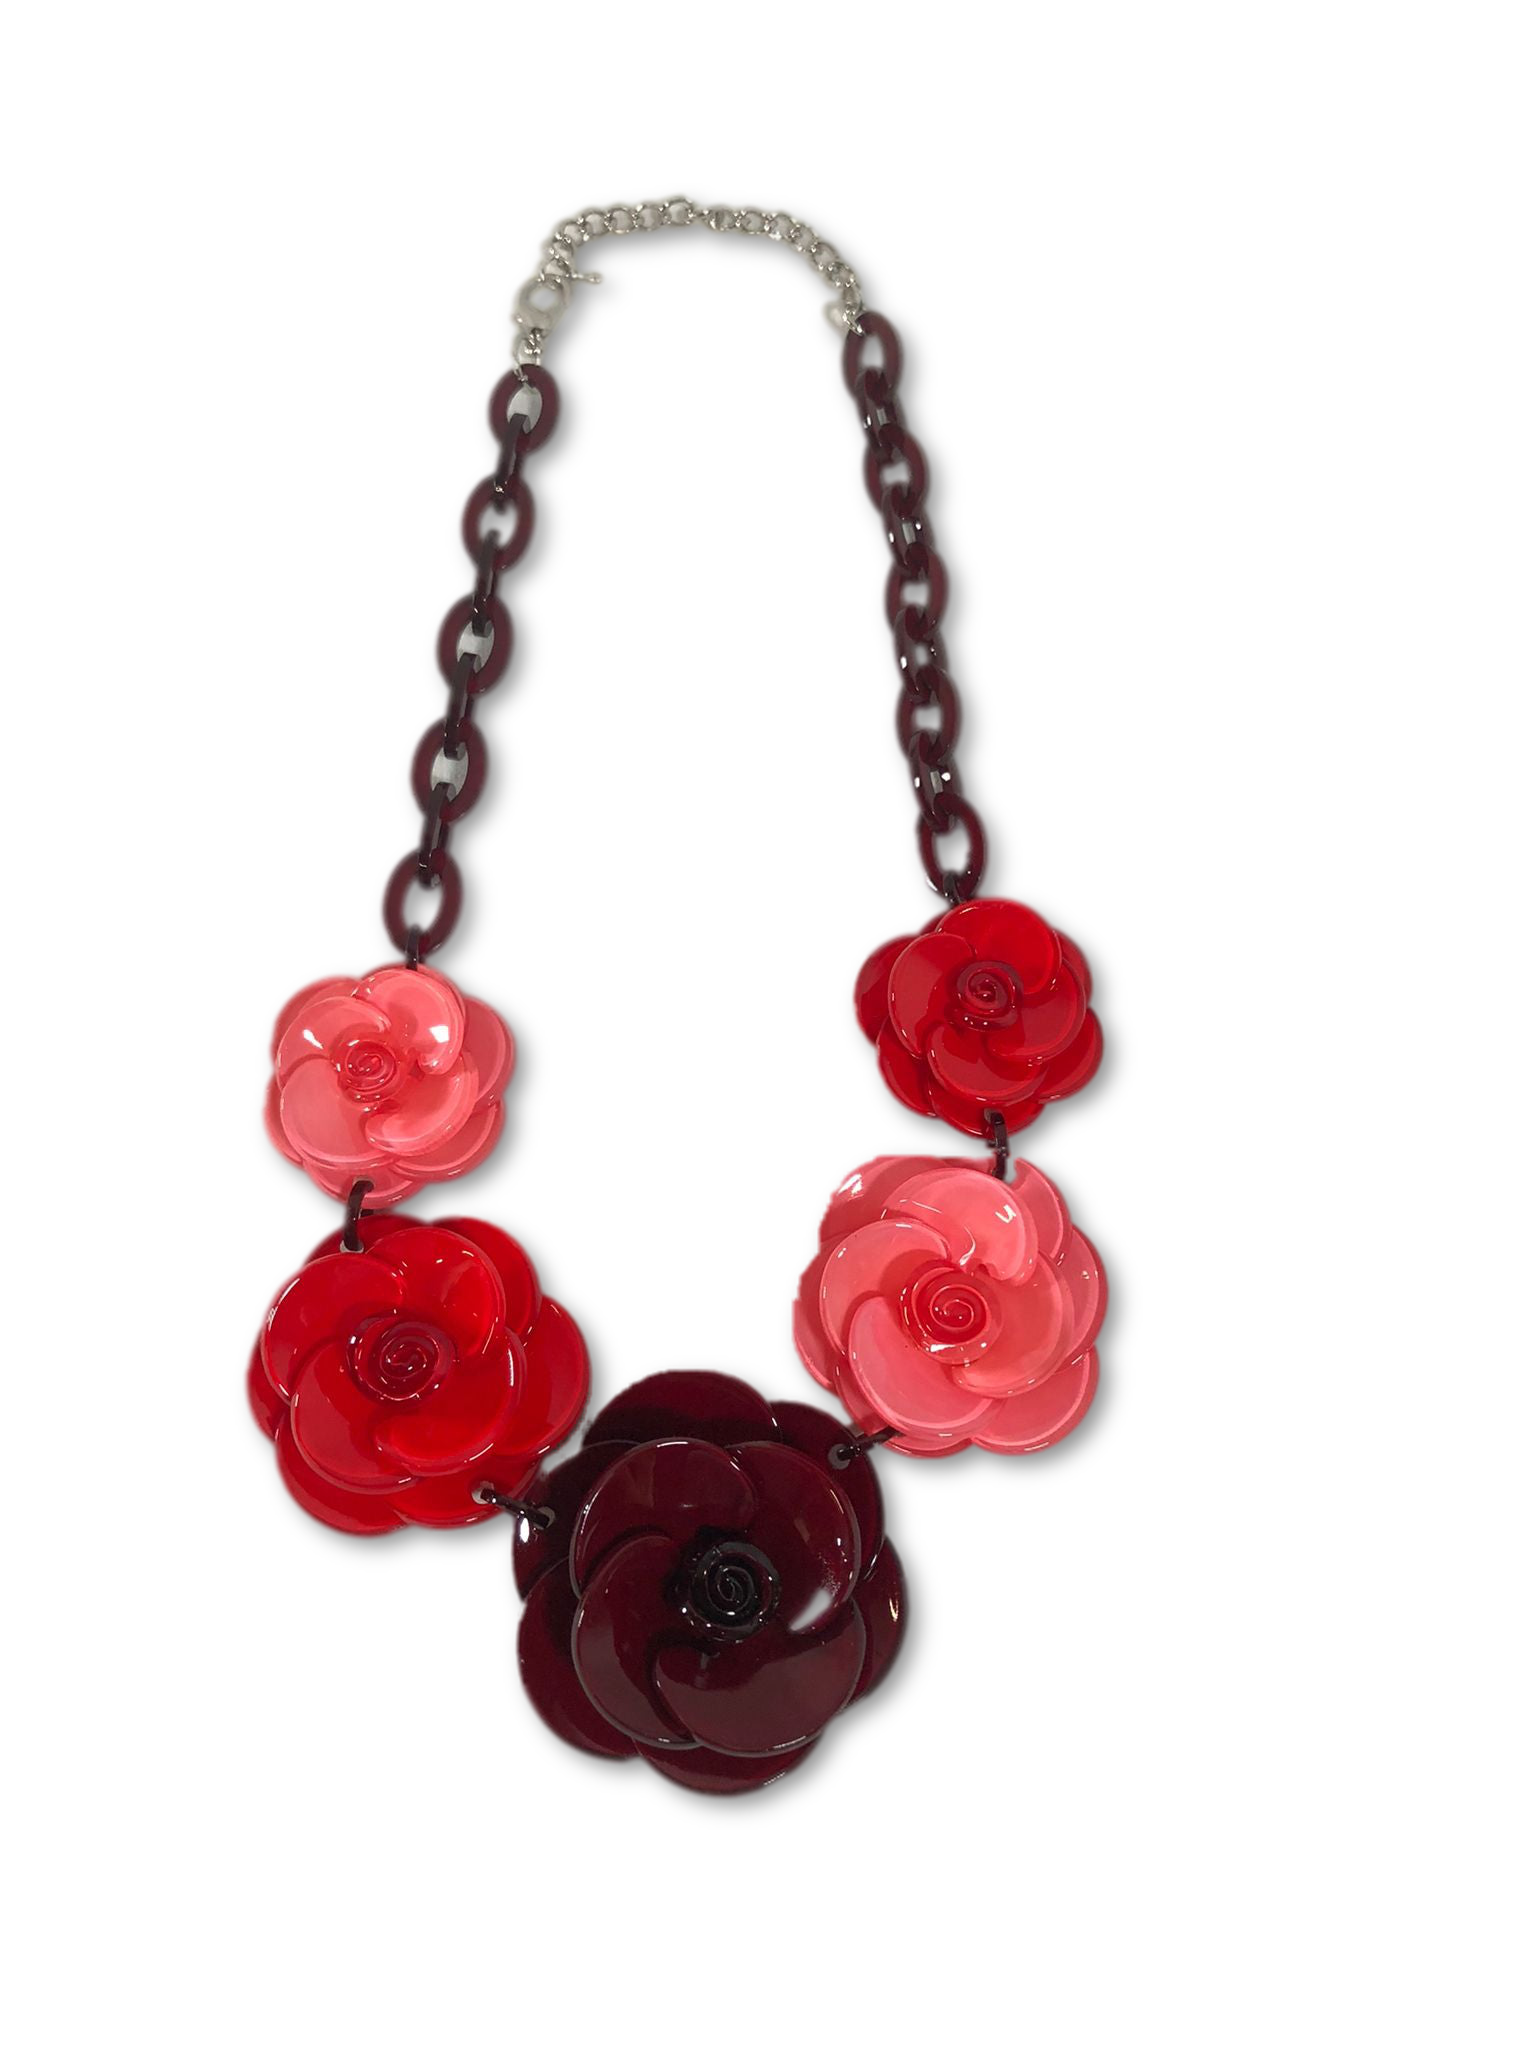 Red 3D Acrylic Flower Necklace for Women - Fashion Jewelry Gift